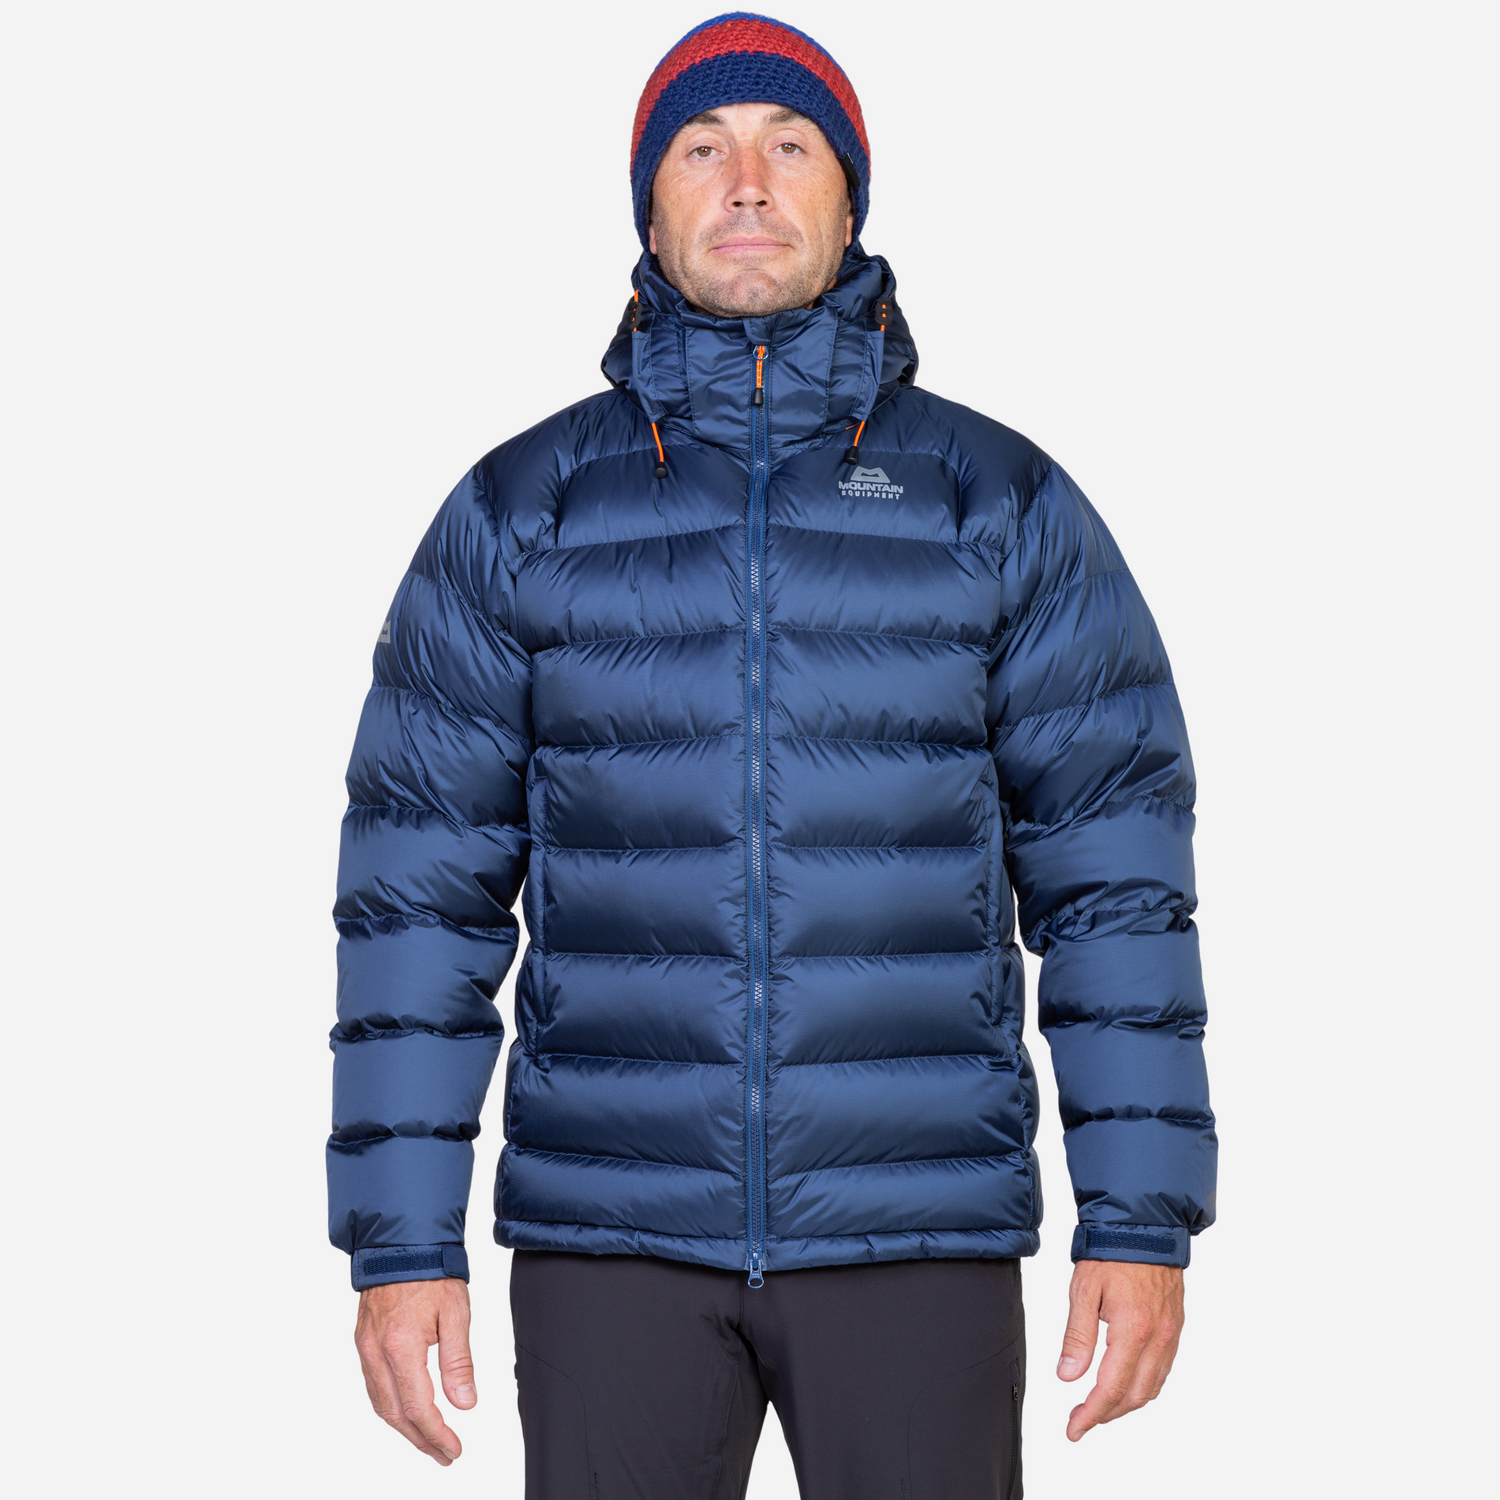 Unlock Wilderness' choice in the Mountain Equipment Vs North Face comparison, the Lightline Jacket by Mountain Equipment